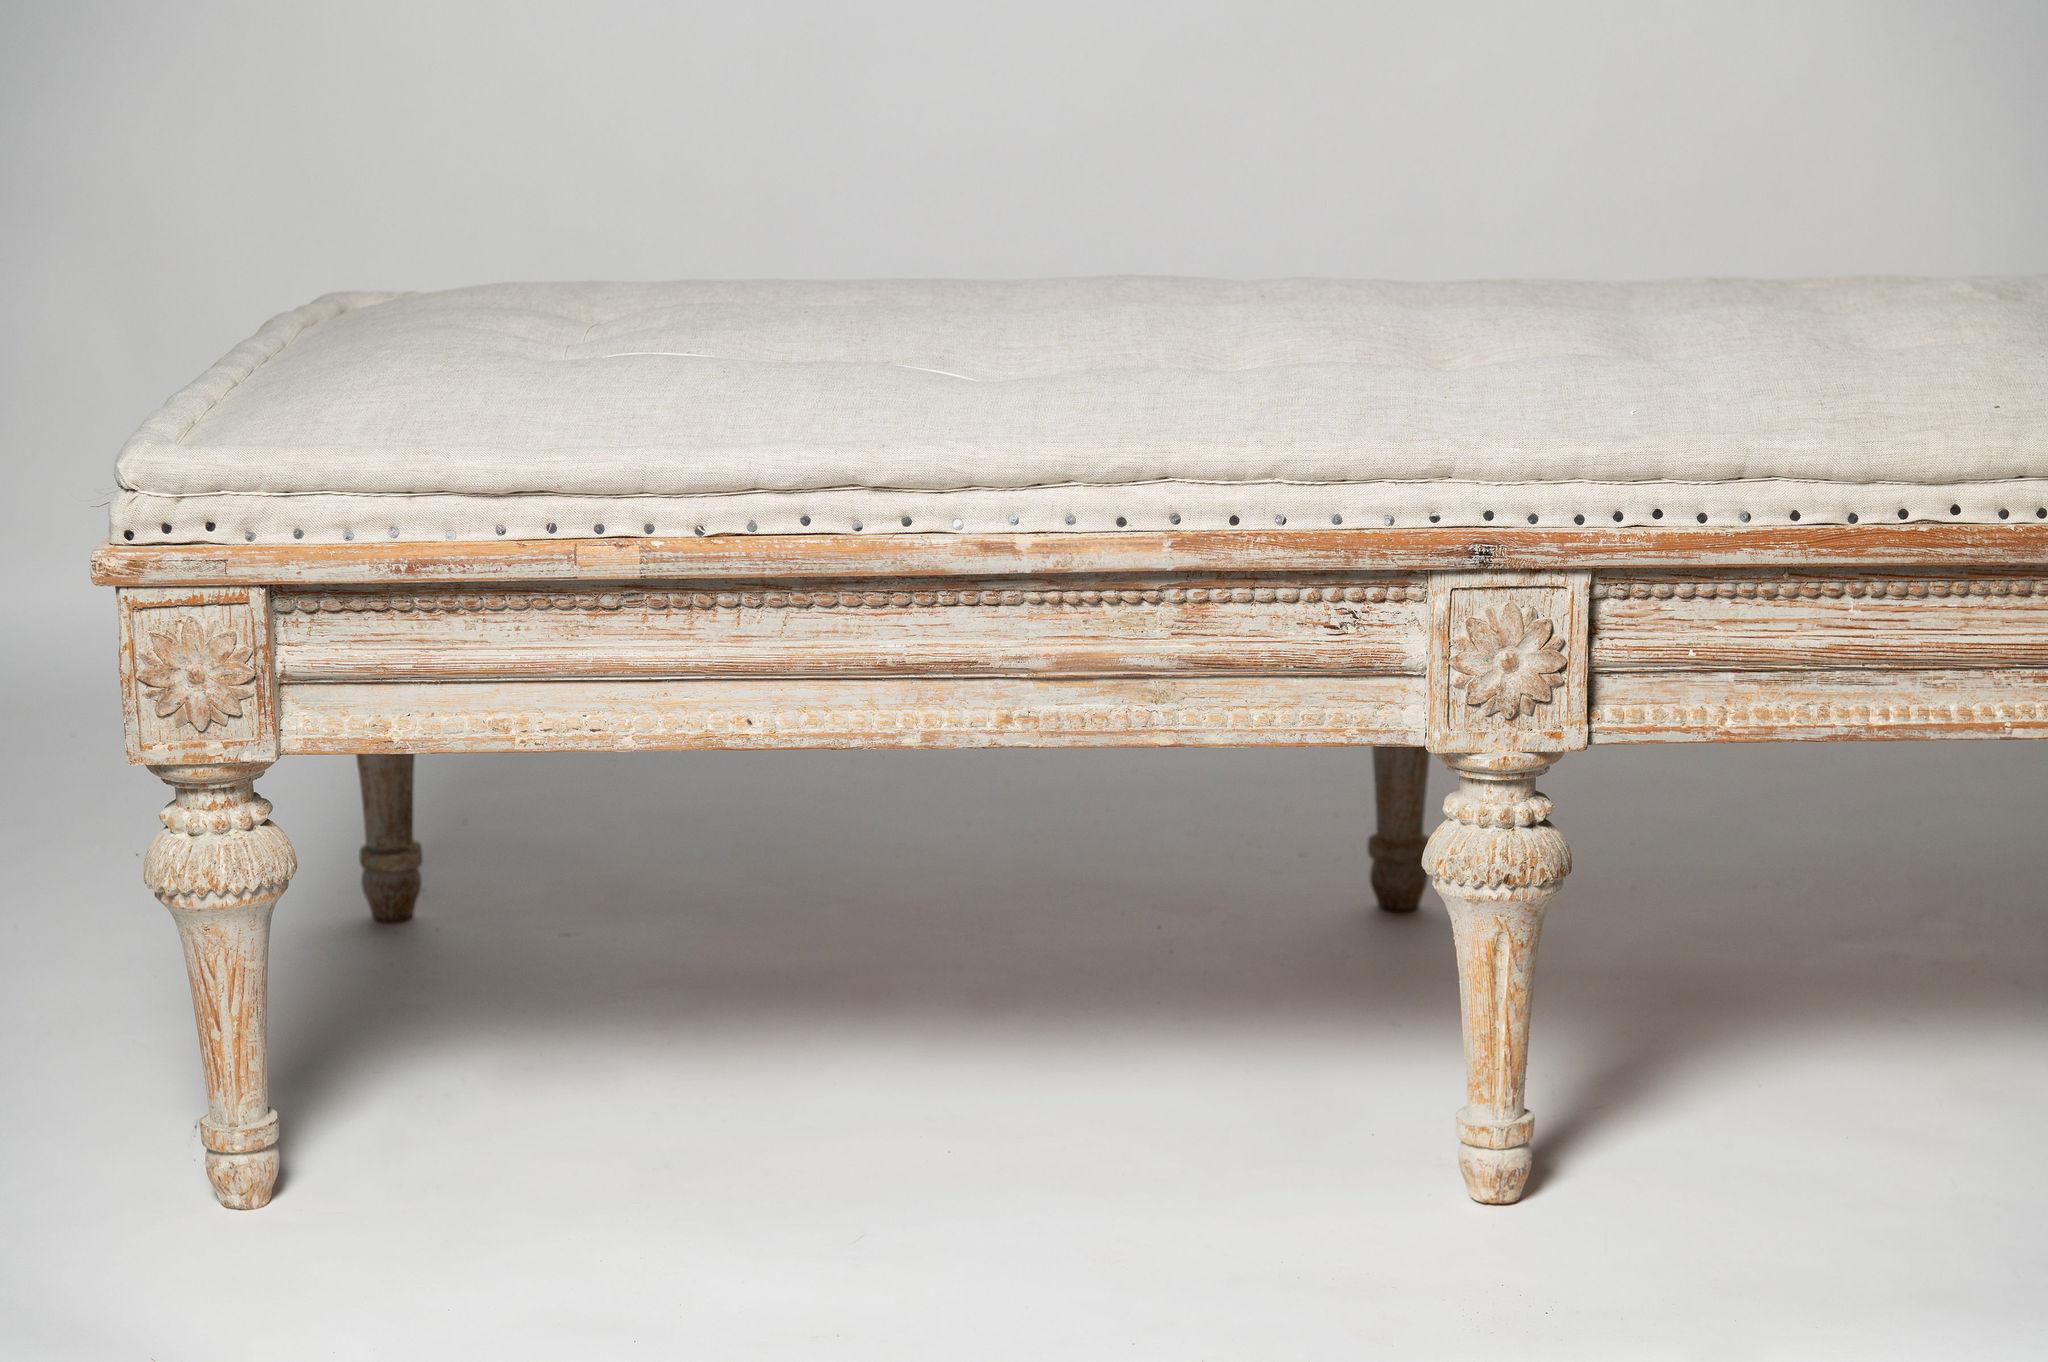 A period 18th Century c1780 Gustavian bench with wood carved decor to all four sides, later paint, recently upholstered in the traditional style in linen. A rare model.